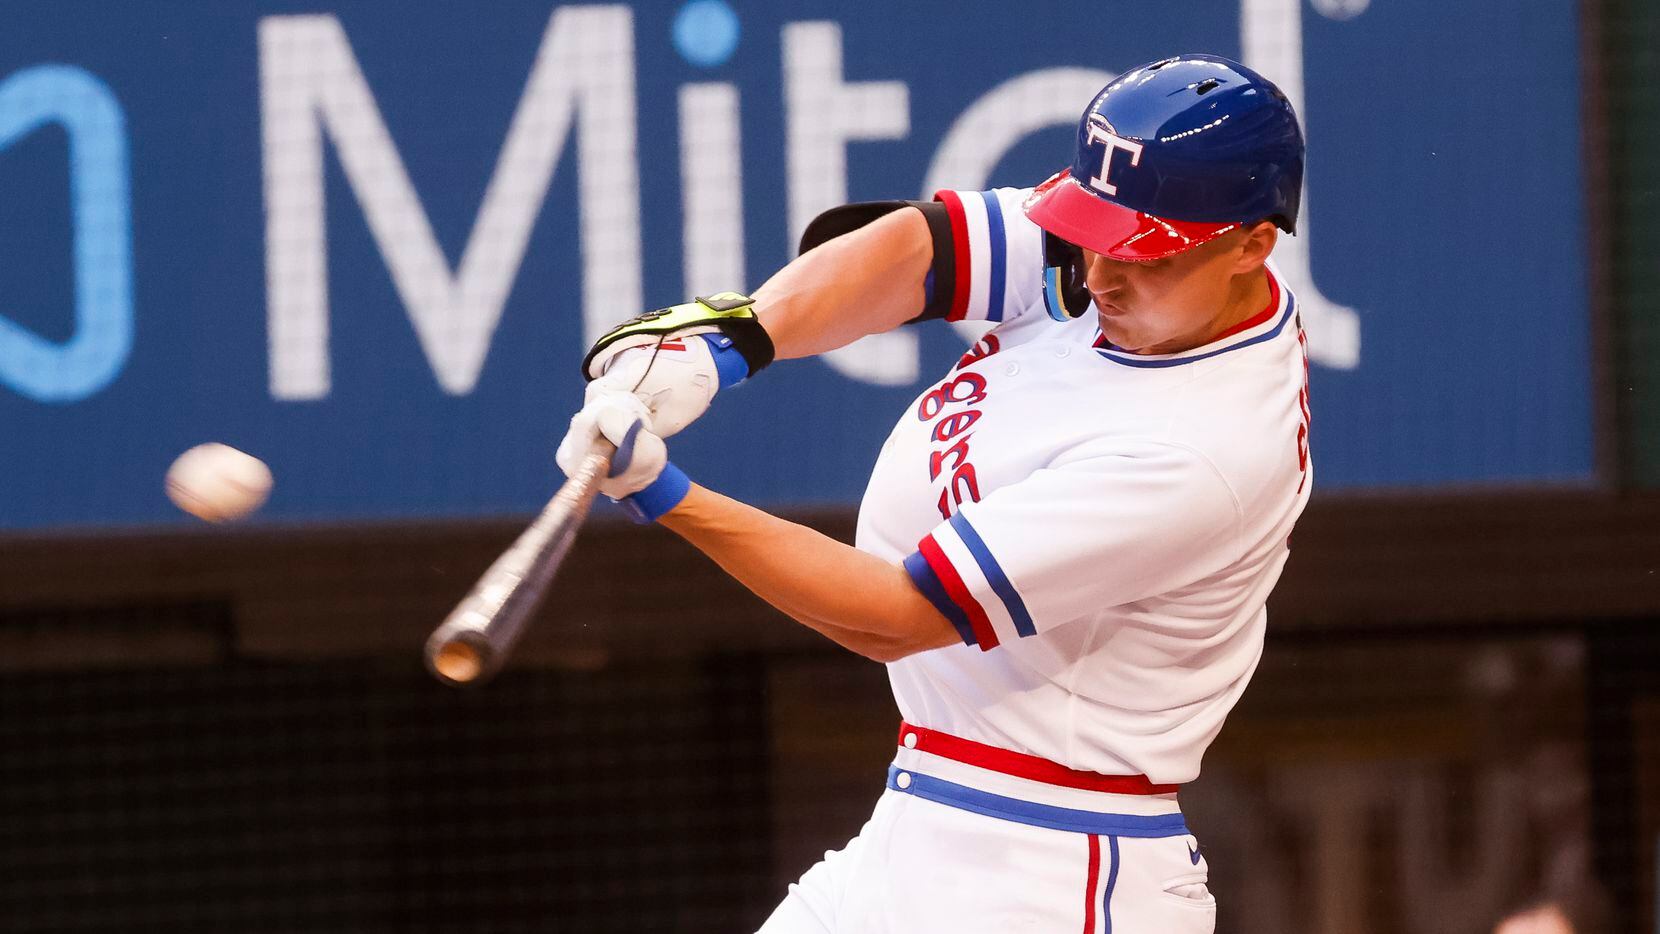 Rangers shortstop Corey Seager named A.L. Player of the Week